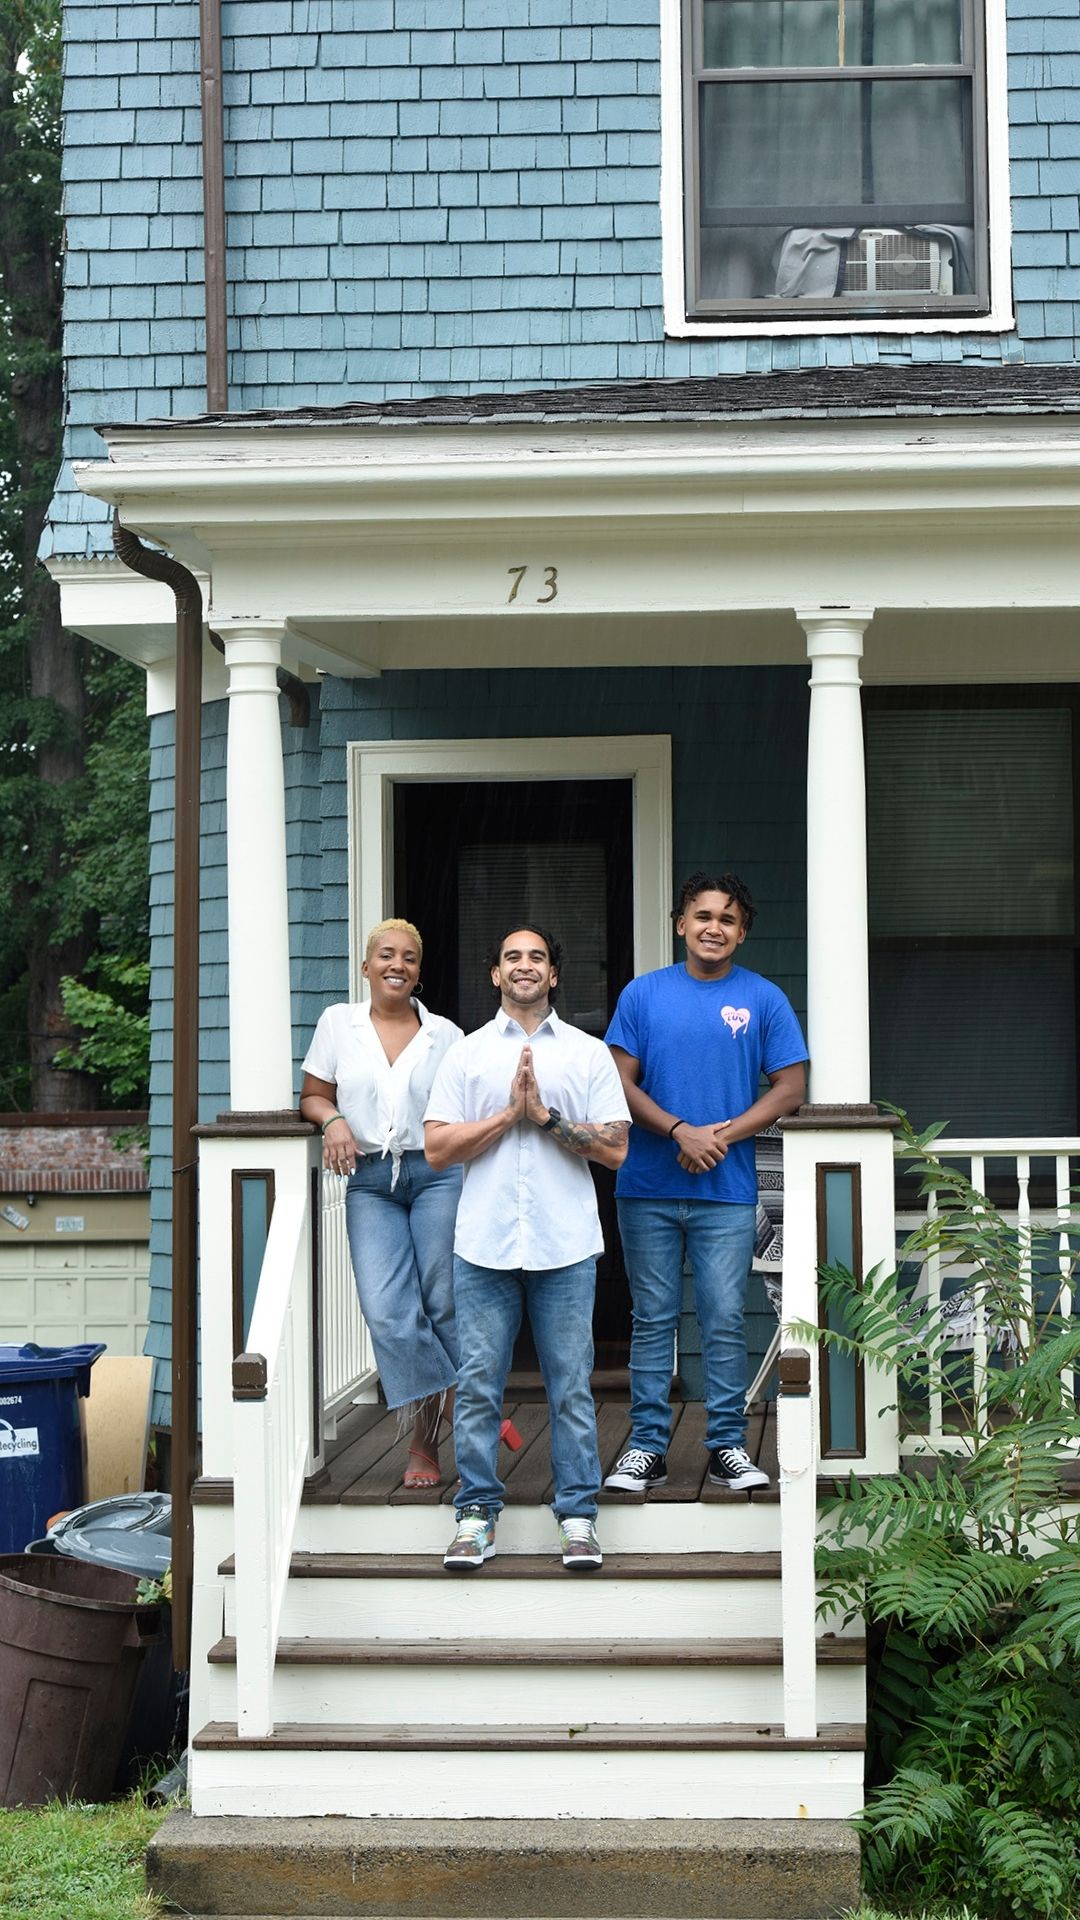 From left to right, Taheera, Mike and Christian Massey standing on the front porch steps of their teal house in Dorchester. The steps are brown and wooden with white molding. Taheera and Mike are wearing jeans a white t-shirts. Christian is wearing a blue T shirt. Green grass a leafy shrubs are in front of/to the right of the steps.